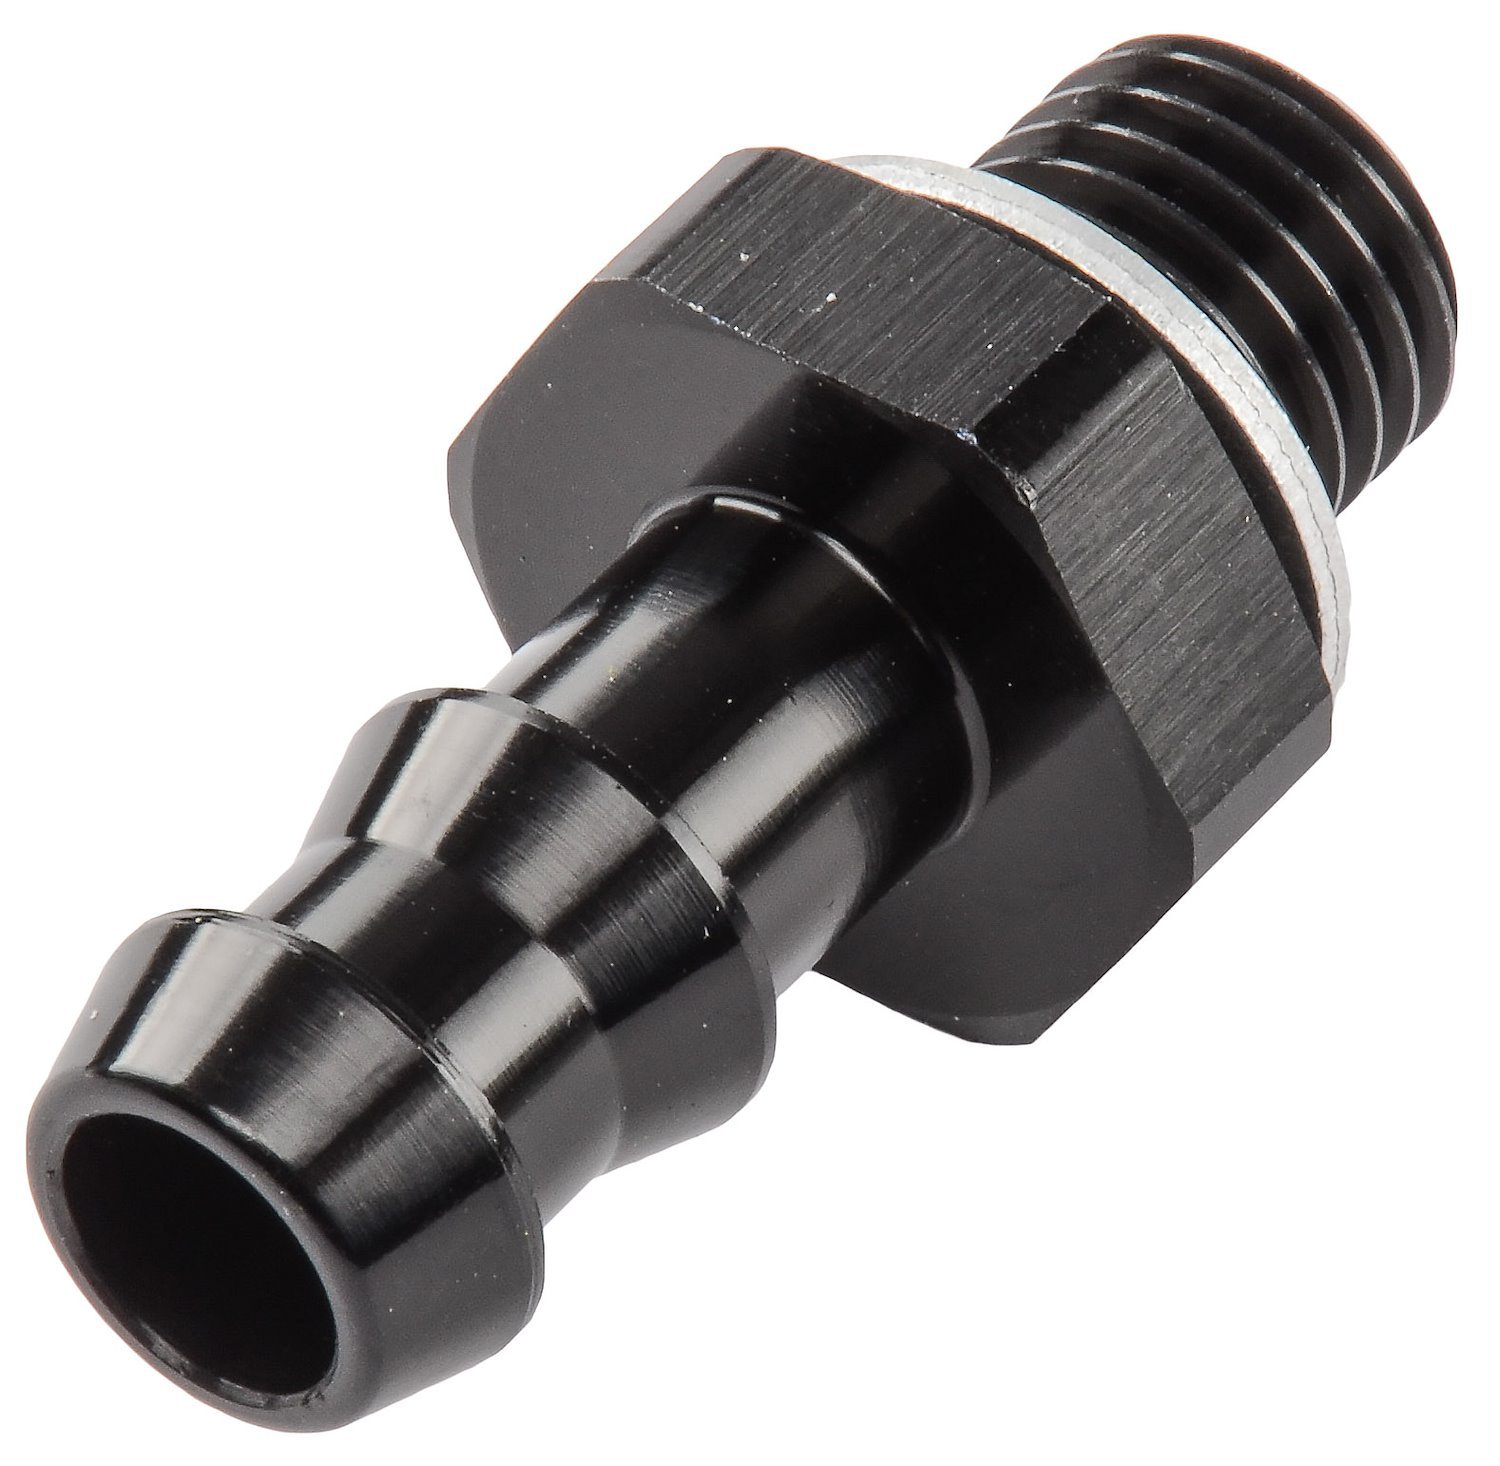 Hose Barb Adapter 12mm x 1.5 Male Straight to 3/8" Hose